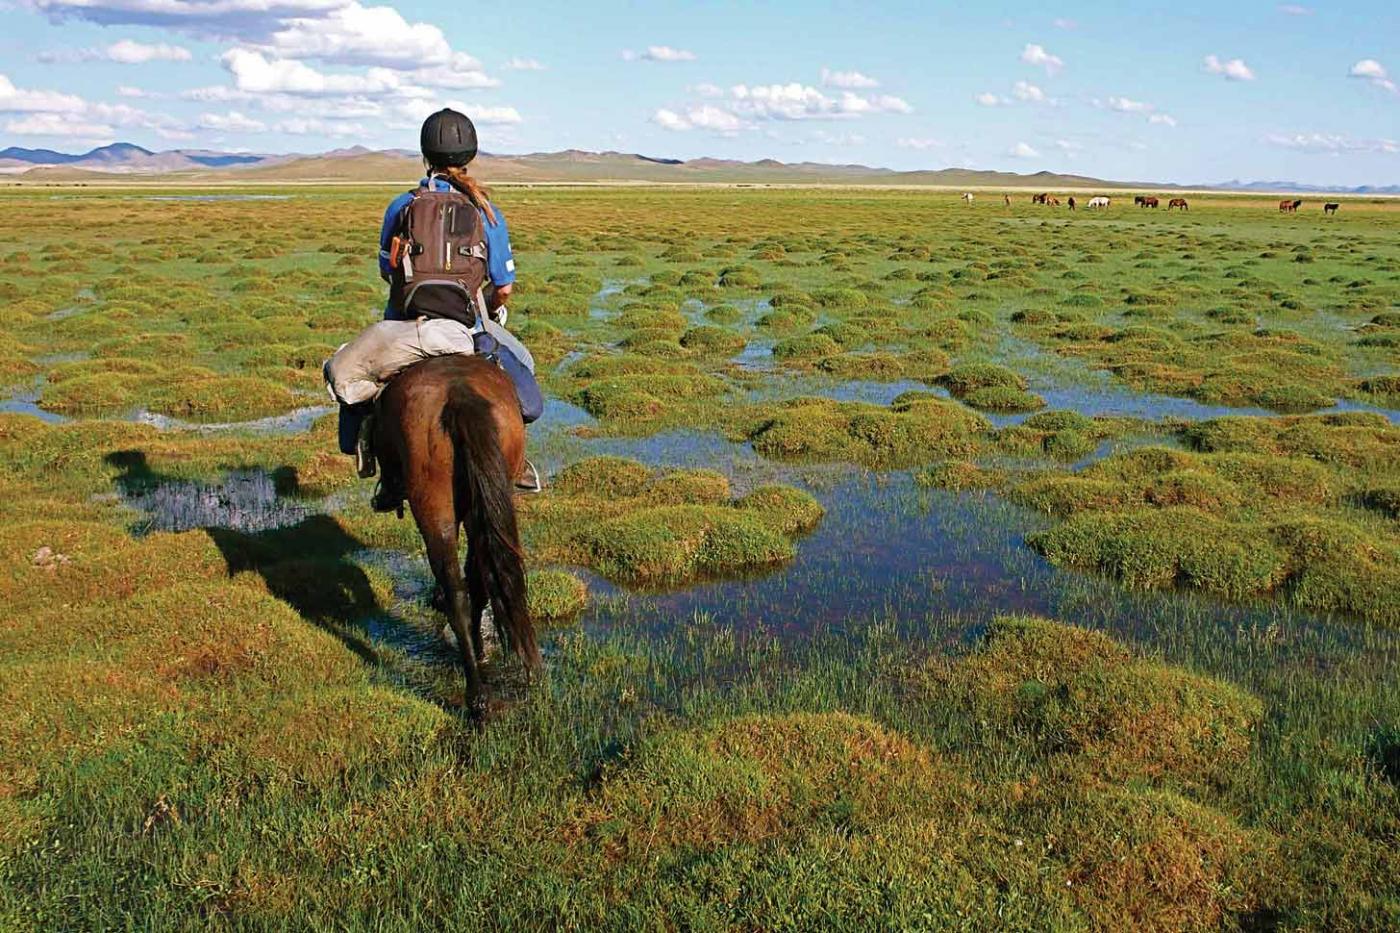 Charlotte Davidson rode across the Mongolian steppe--and rasied money for charity in the process.